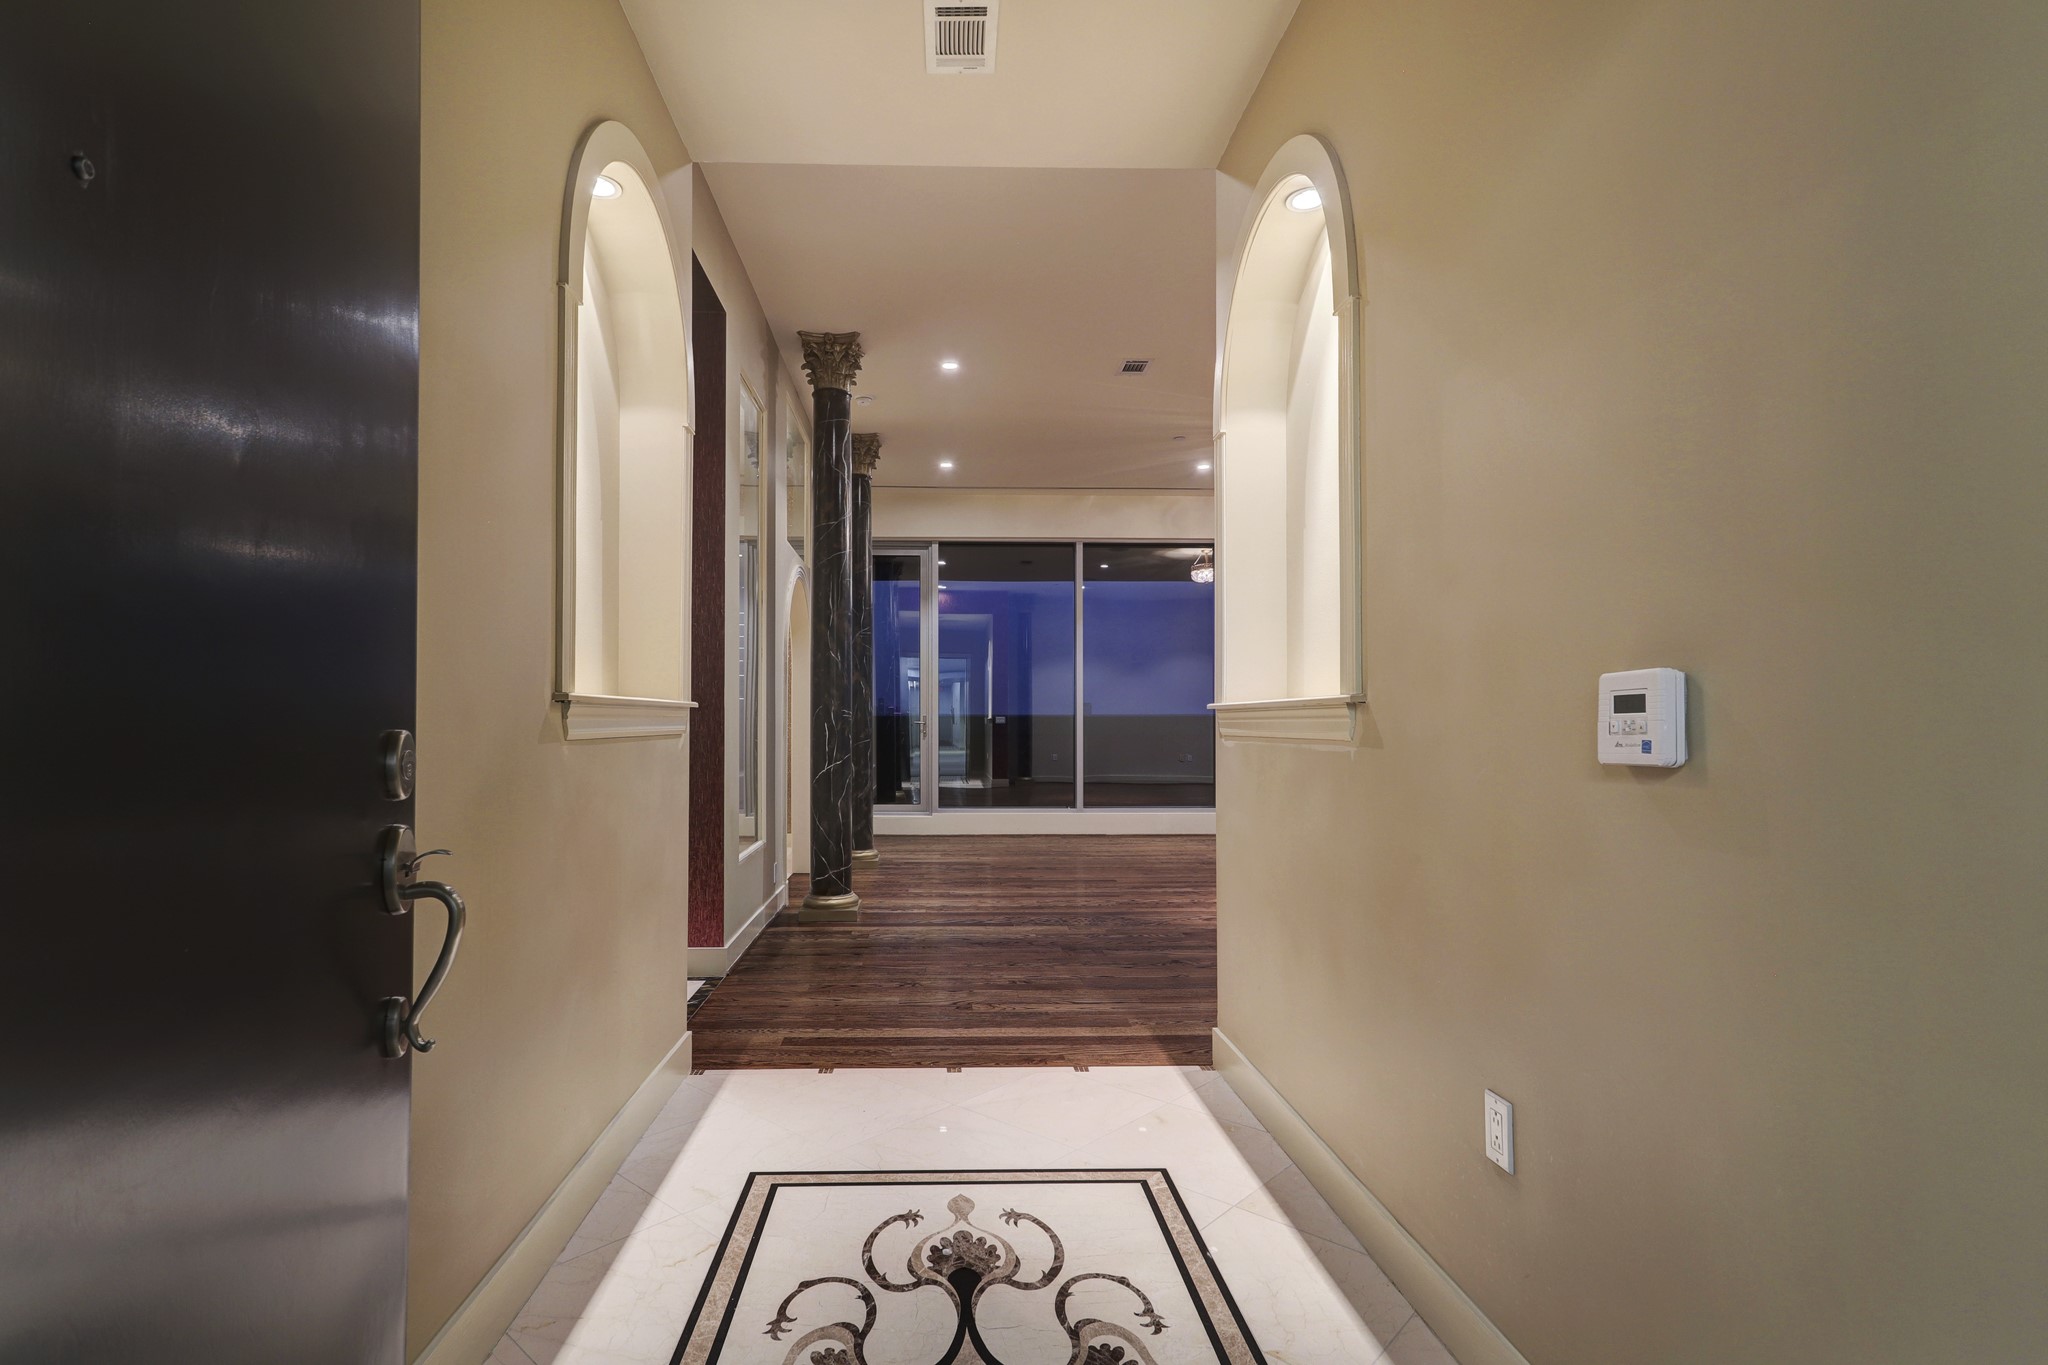 This Formal Entry is one of two entrances into the unit and features repolished marble floor with decorative inlay and two lighted art arches.